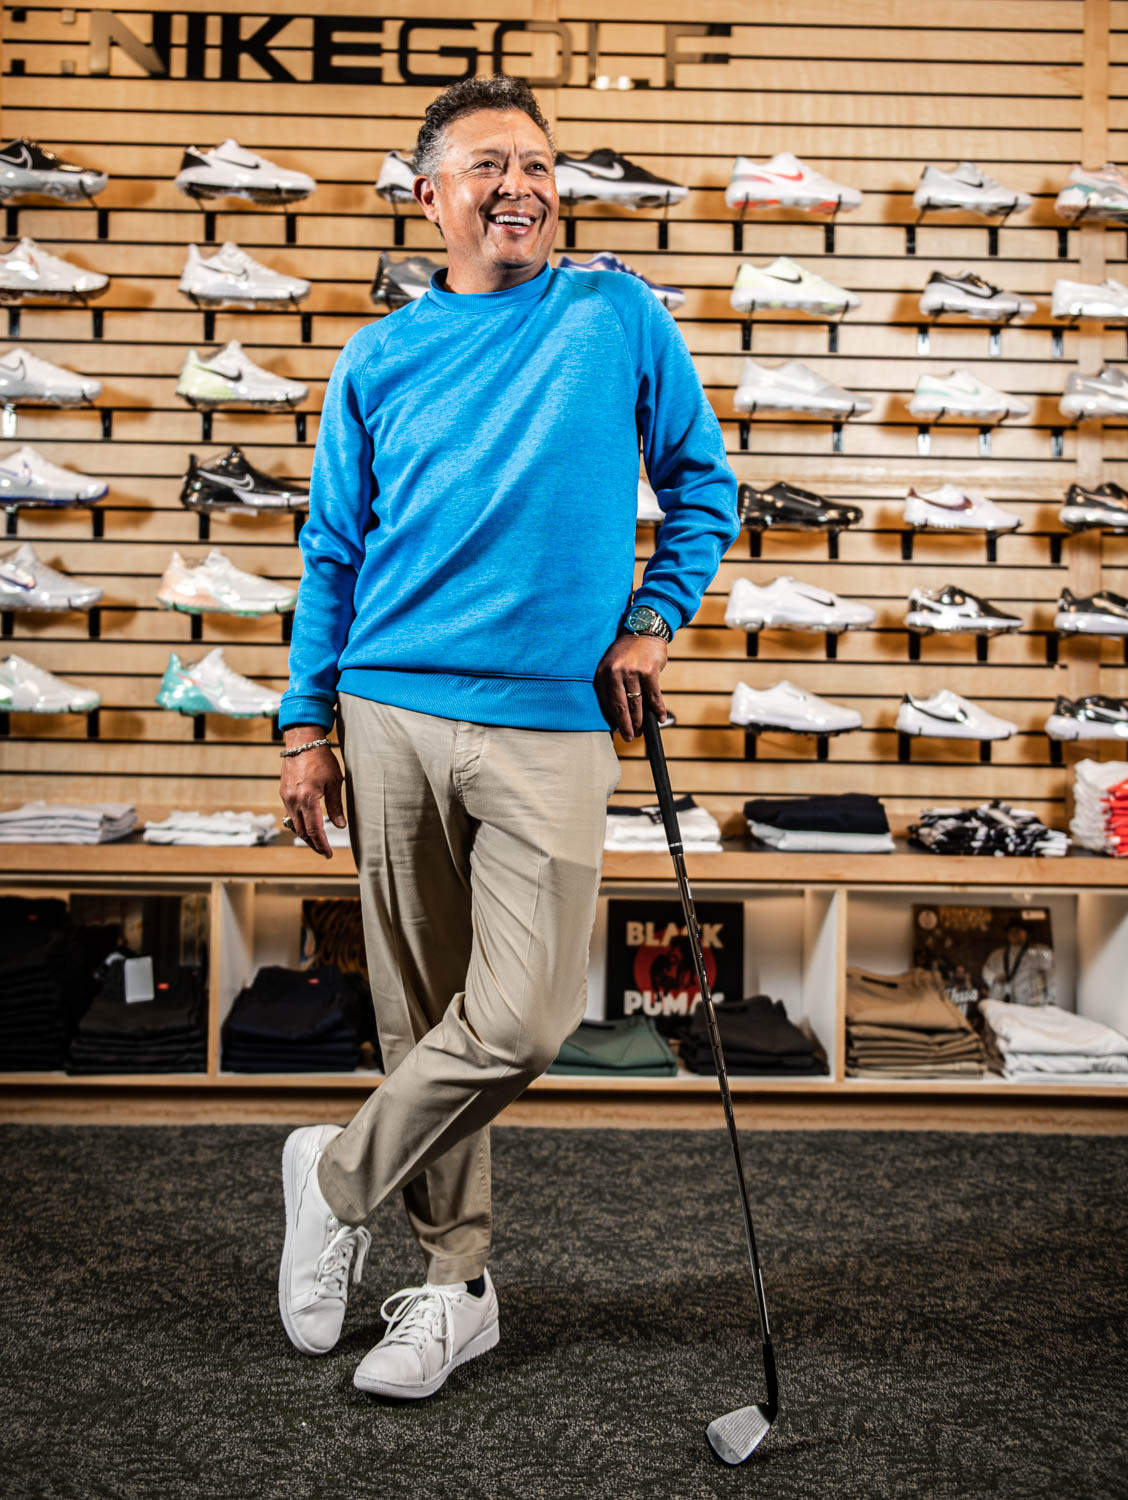 Tony Martinez, PGA, stands in his golf shop at Keeton Park Golf Course. (Photo by Ryan Lochhead)